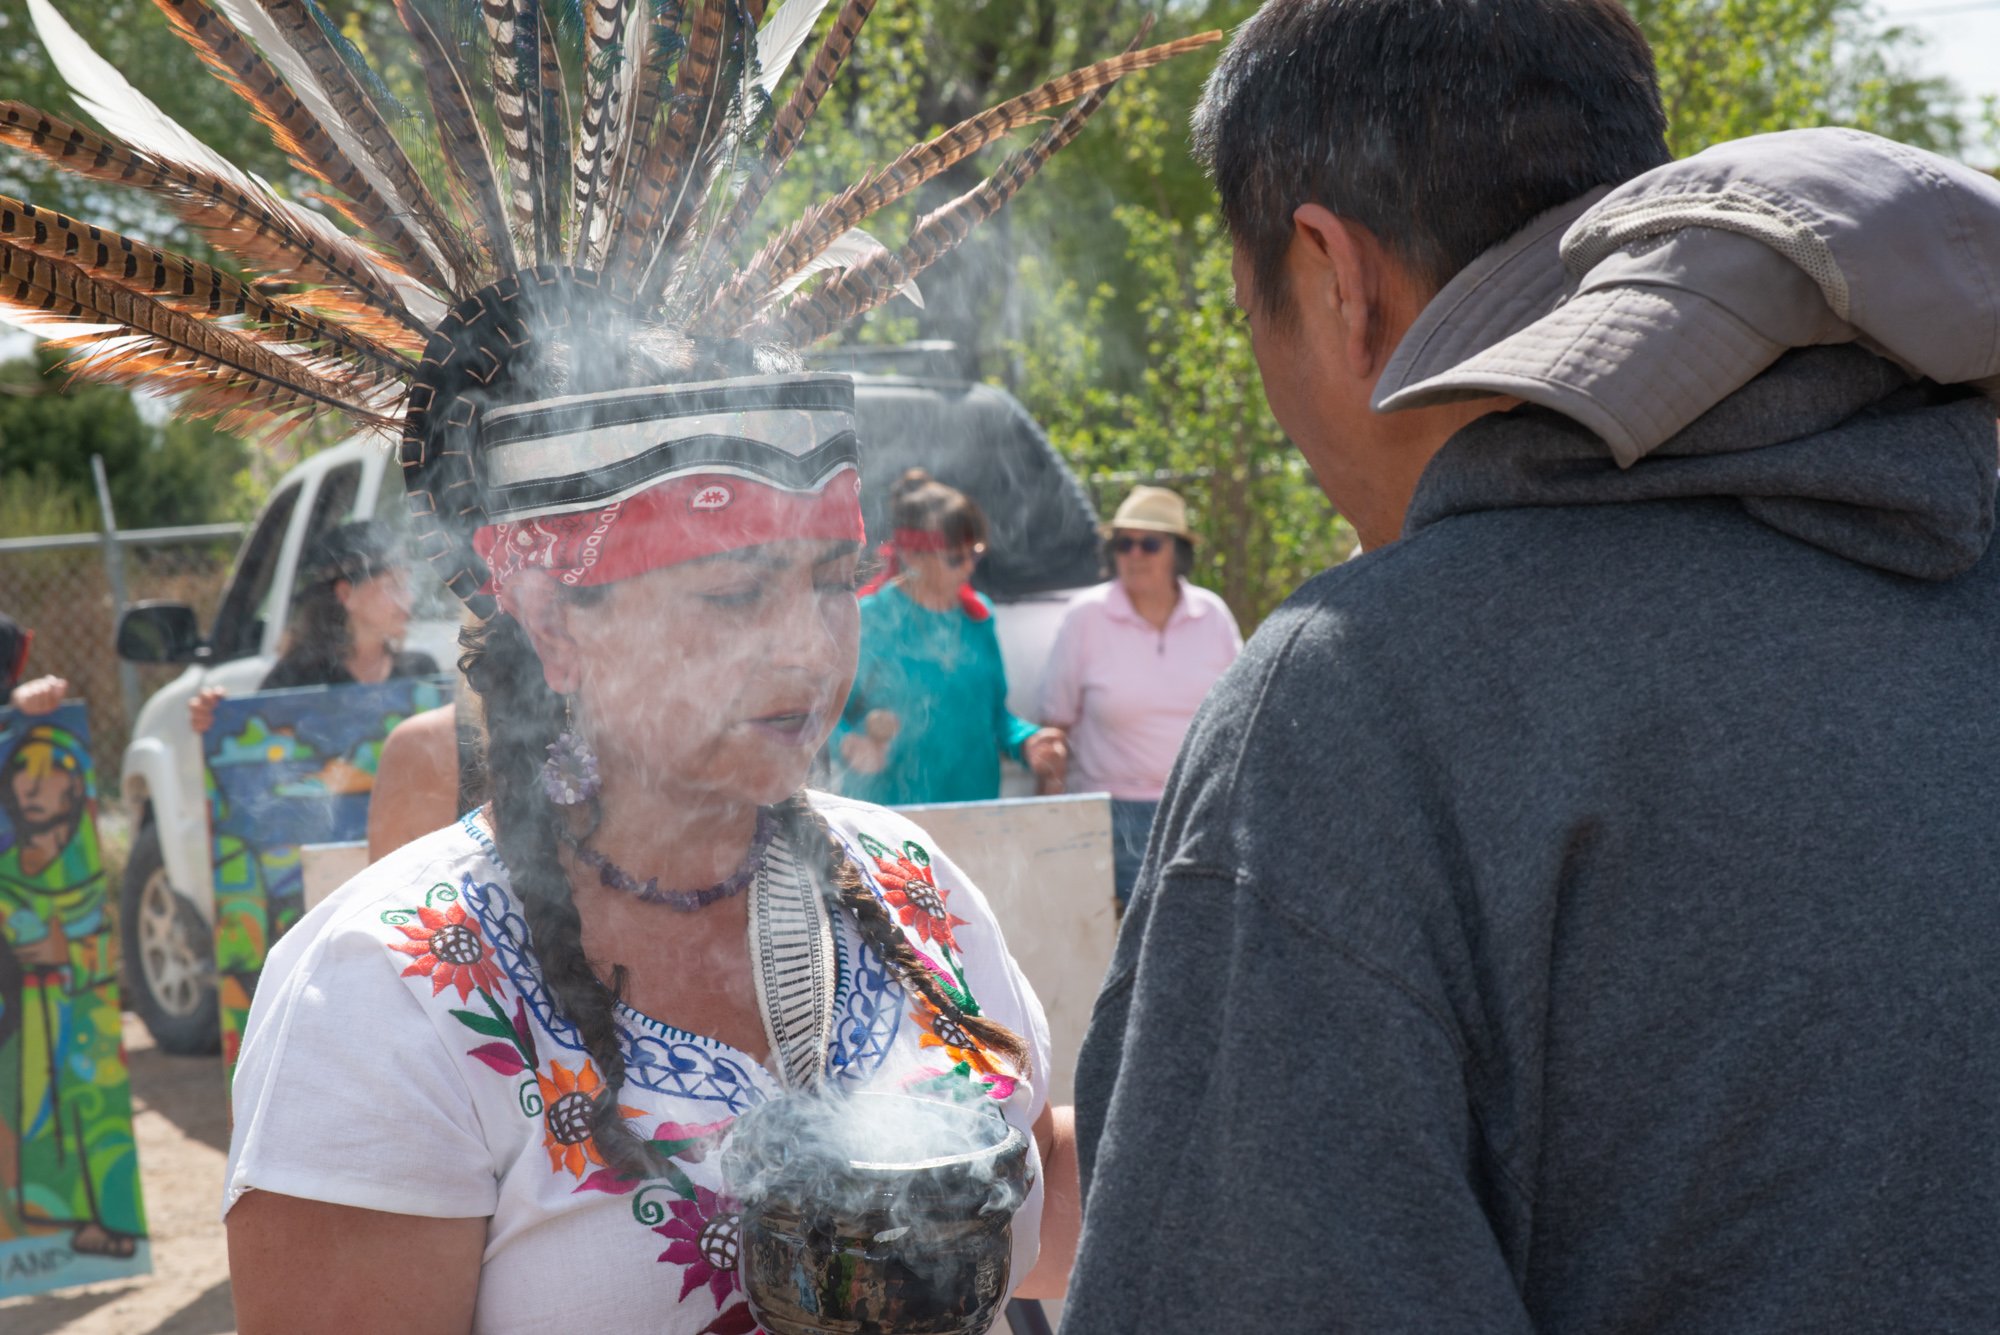   Local pueblo tribal members perform a cleansing smudge ceremony during the rituals of San Ysidro Festival.  